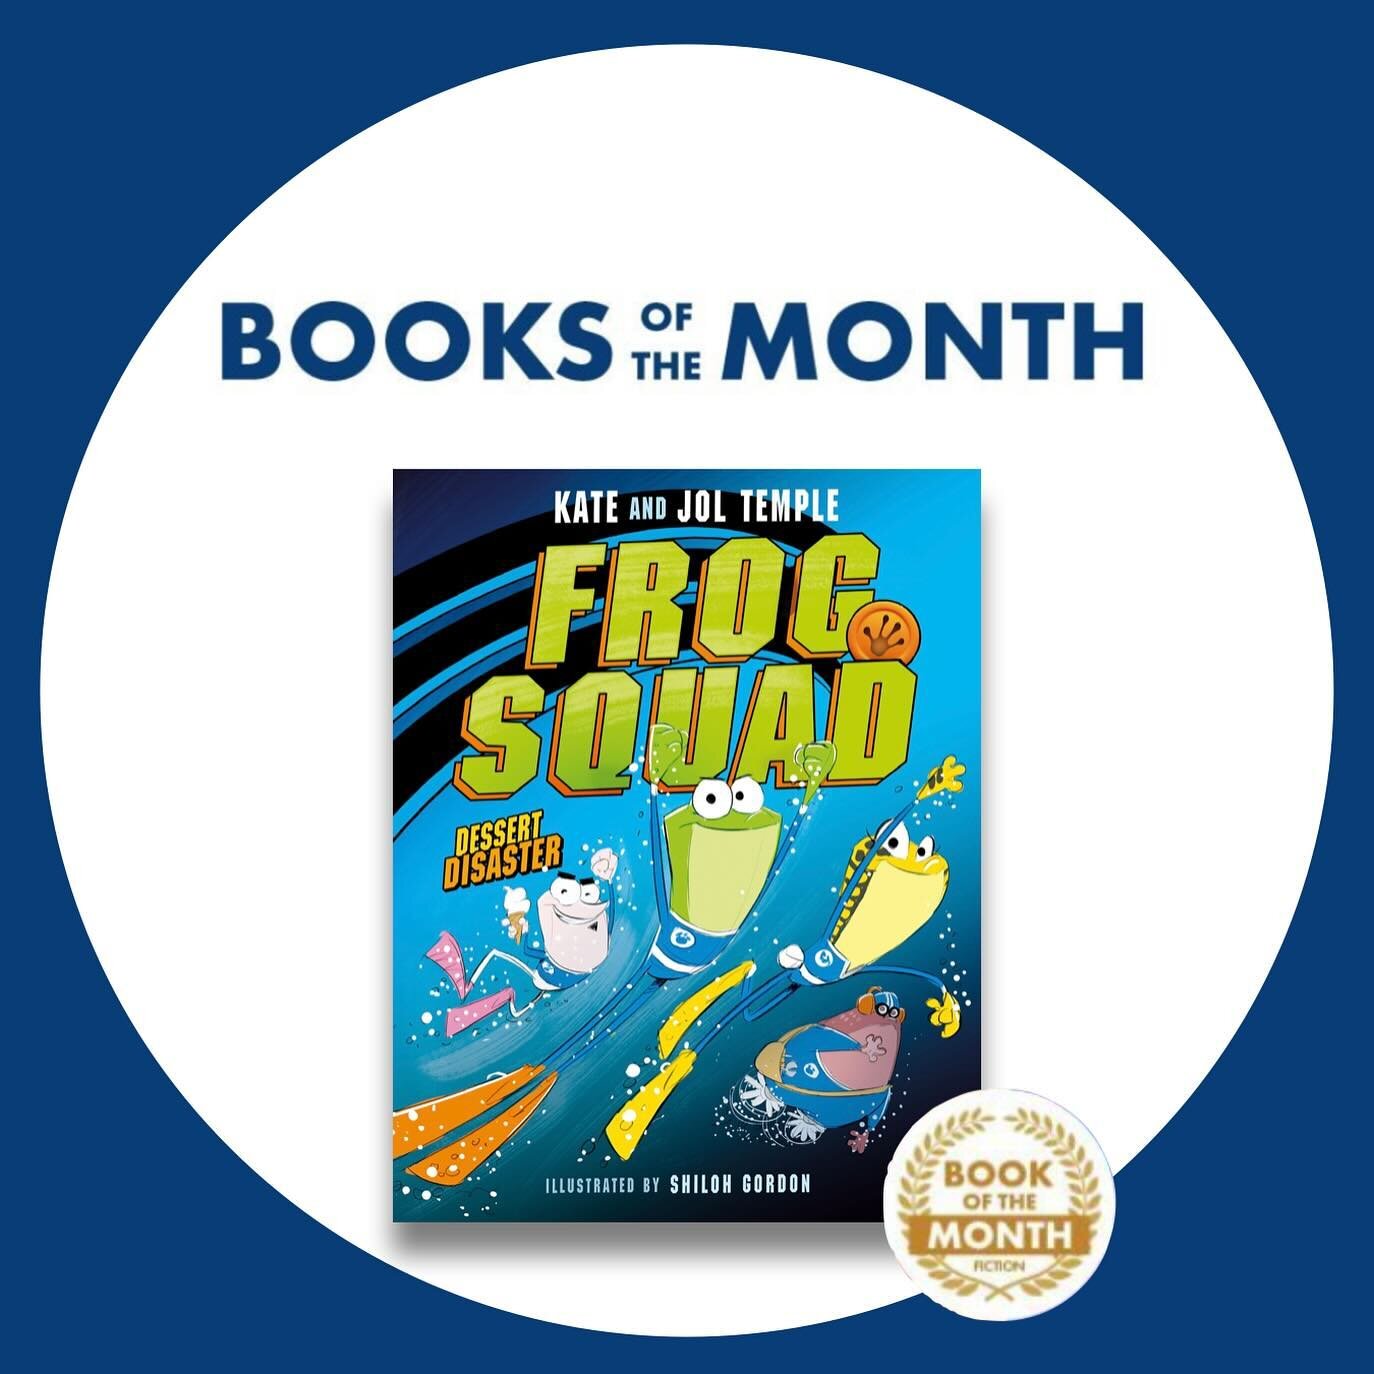 It&rsquo;s April people and we have some EXCITING NEWS!!! 🐸 FROG SQUAD - Dessert Disaster is @qbdbooks Book of the Month! And we are HOPPING with joy! Thanks QBD for picking this froggy adventure tale! It&rsquo;s time to get froggy!!! #frogs #frogco